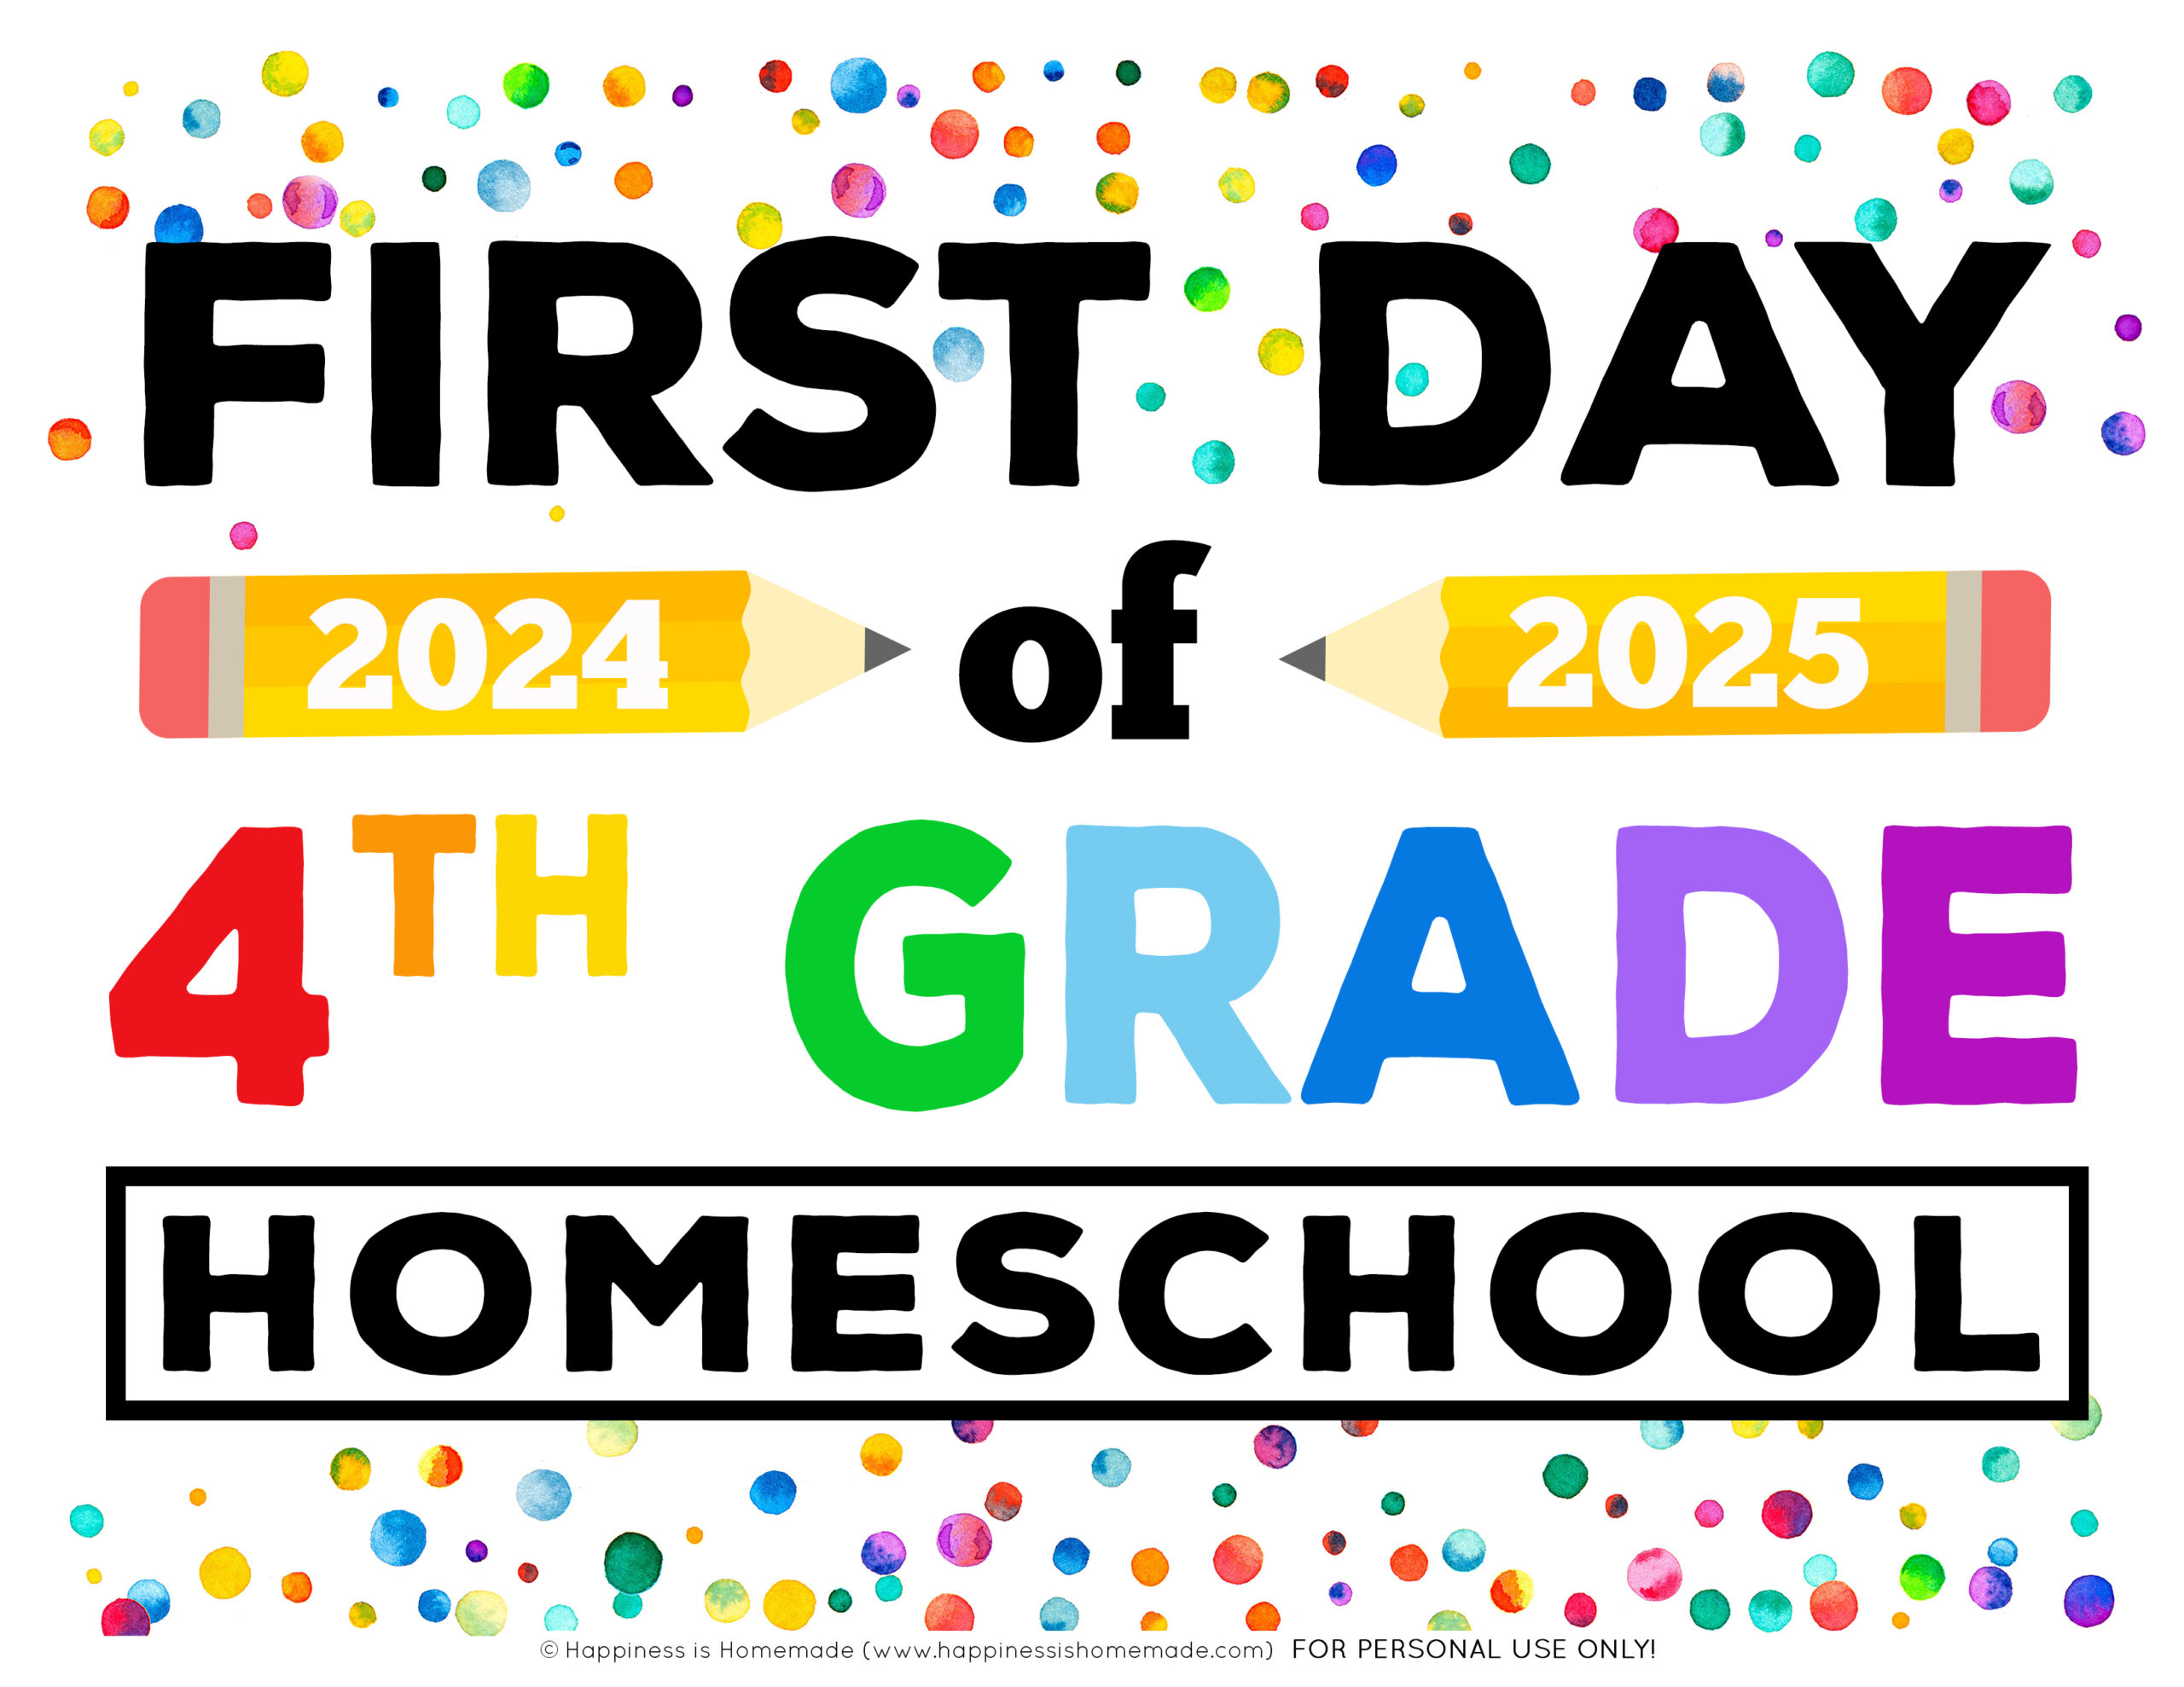 Graphic of Free Printable First Day of Homeschool sign 2024 - 2025